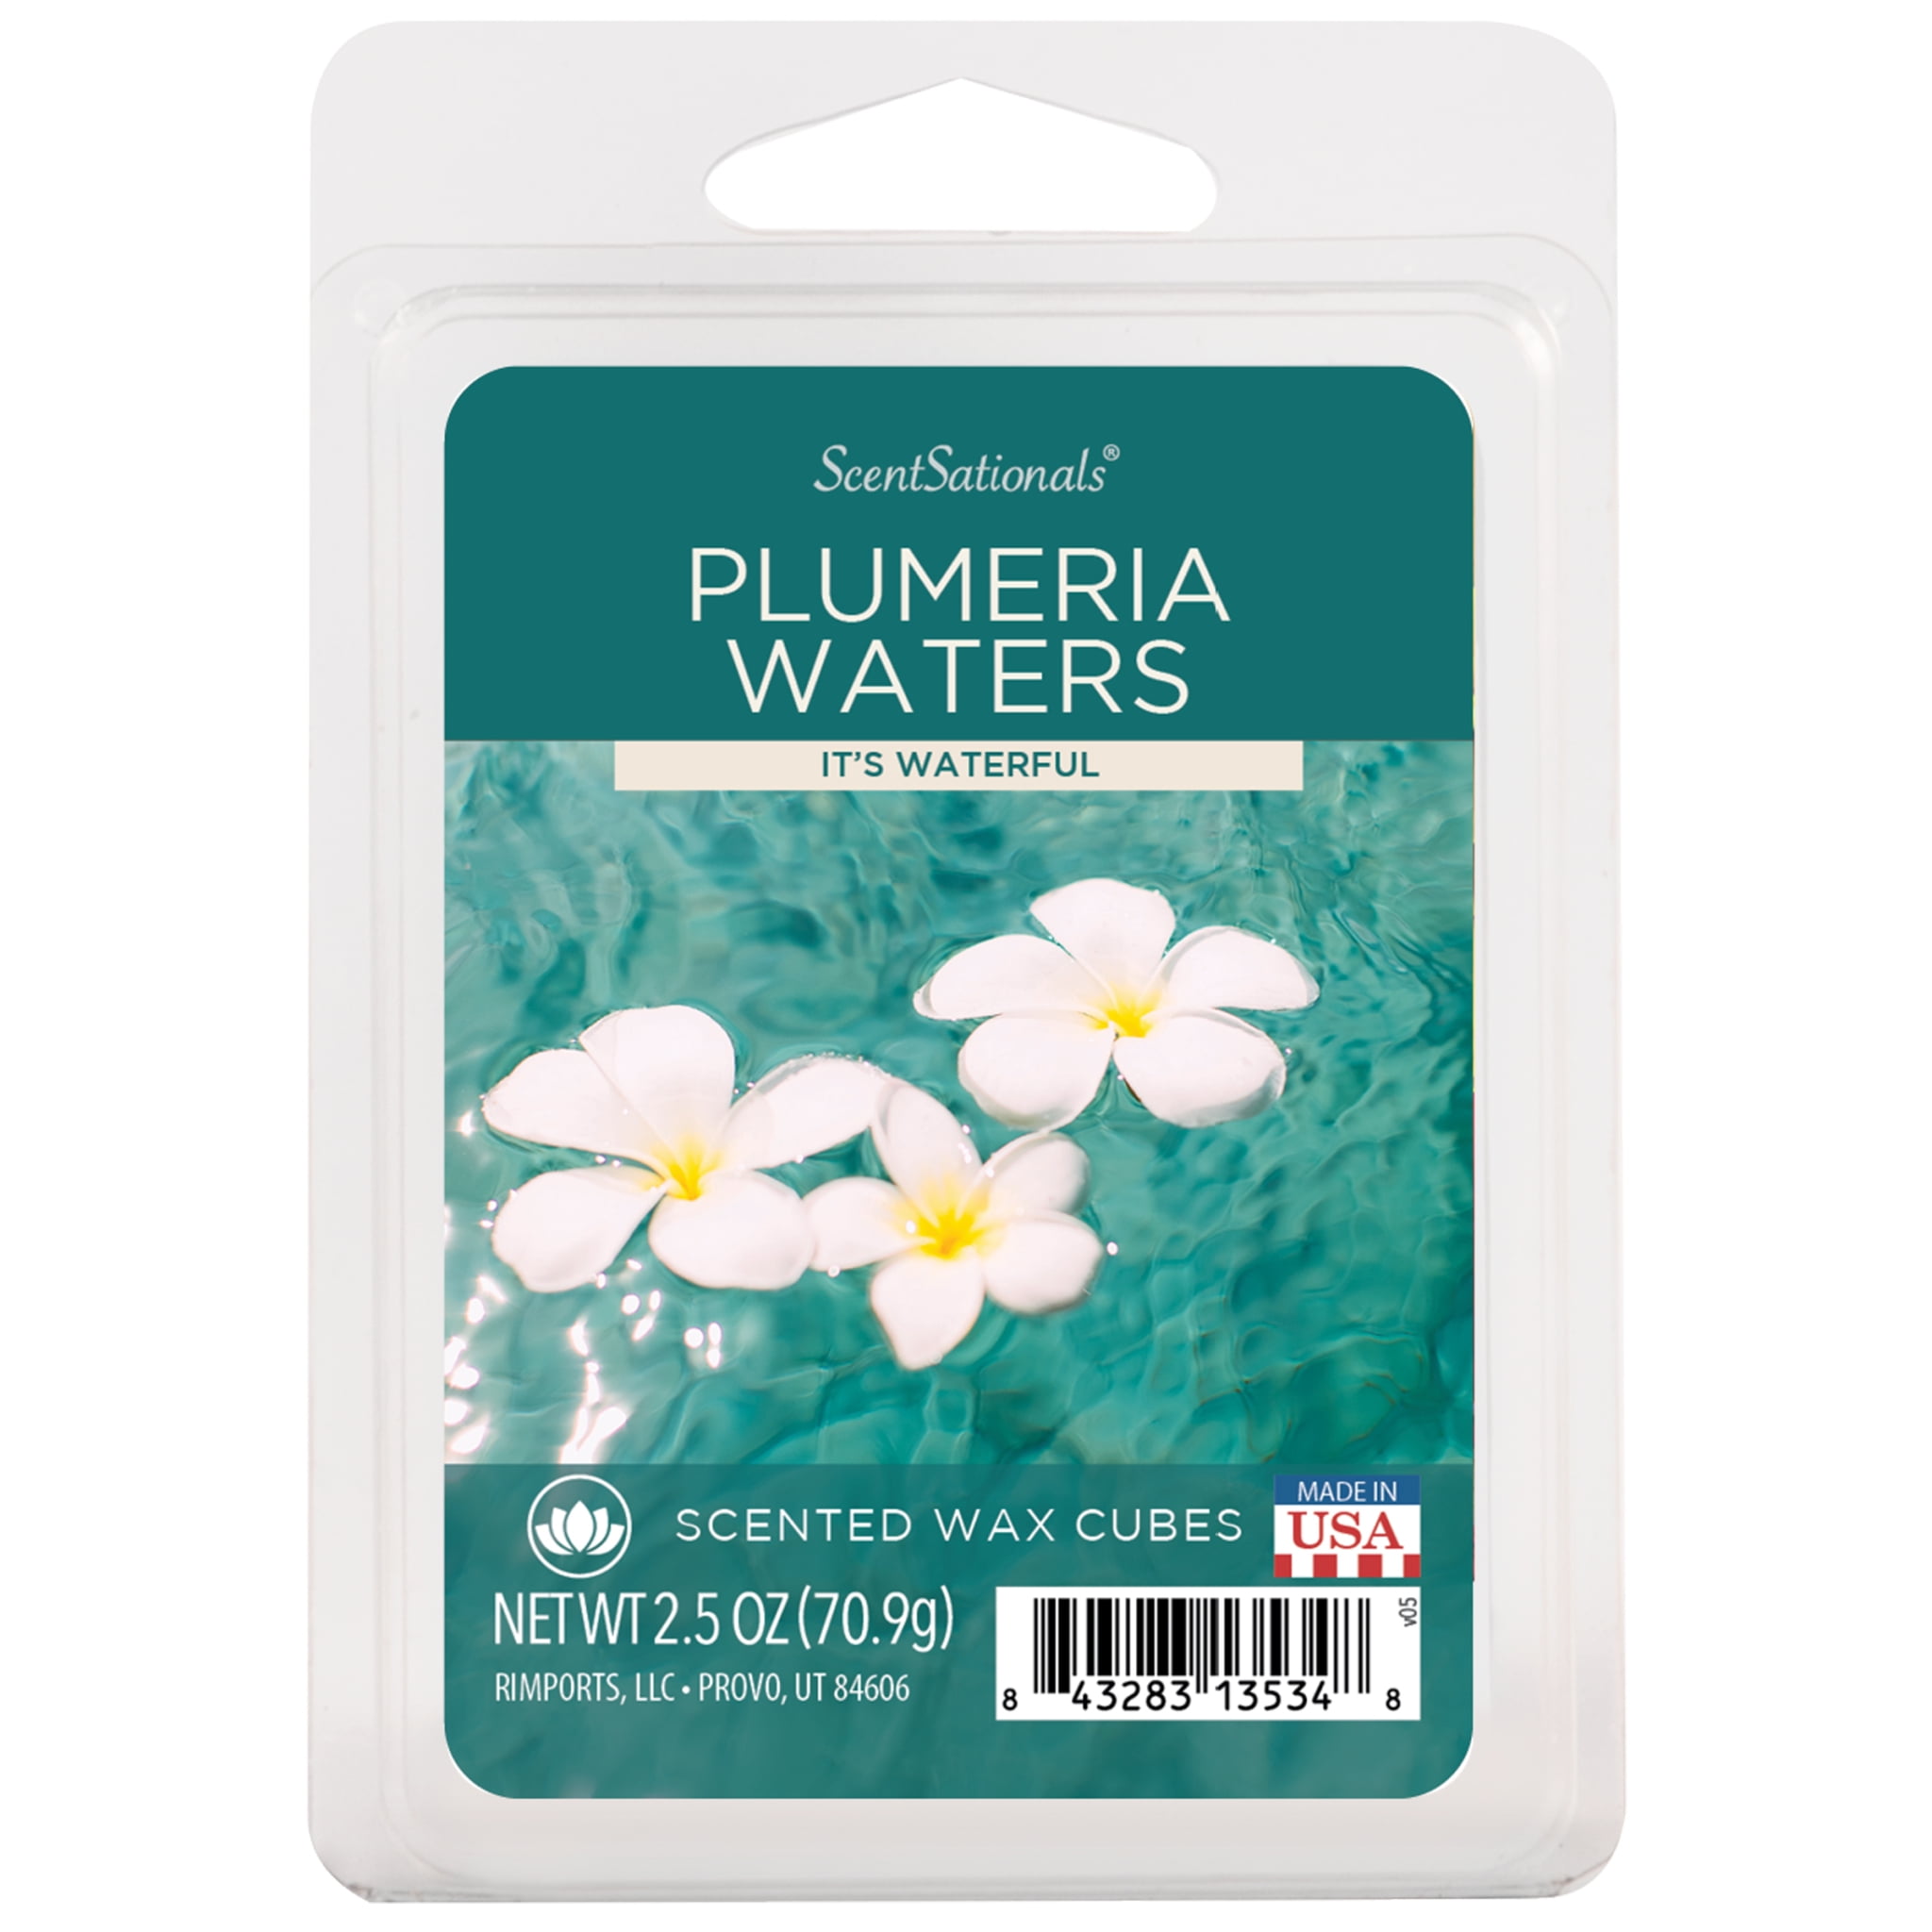 Plumeria Waters Scented Wax Melts, ScentSationals, 2.5 oz (1-Pack)